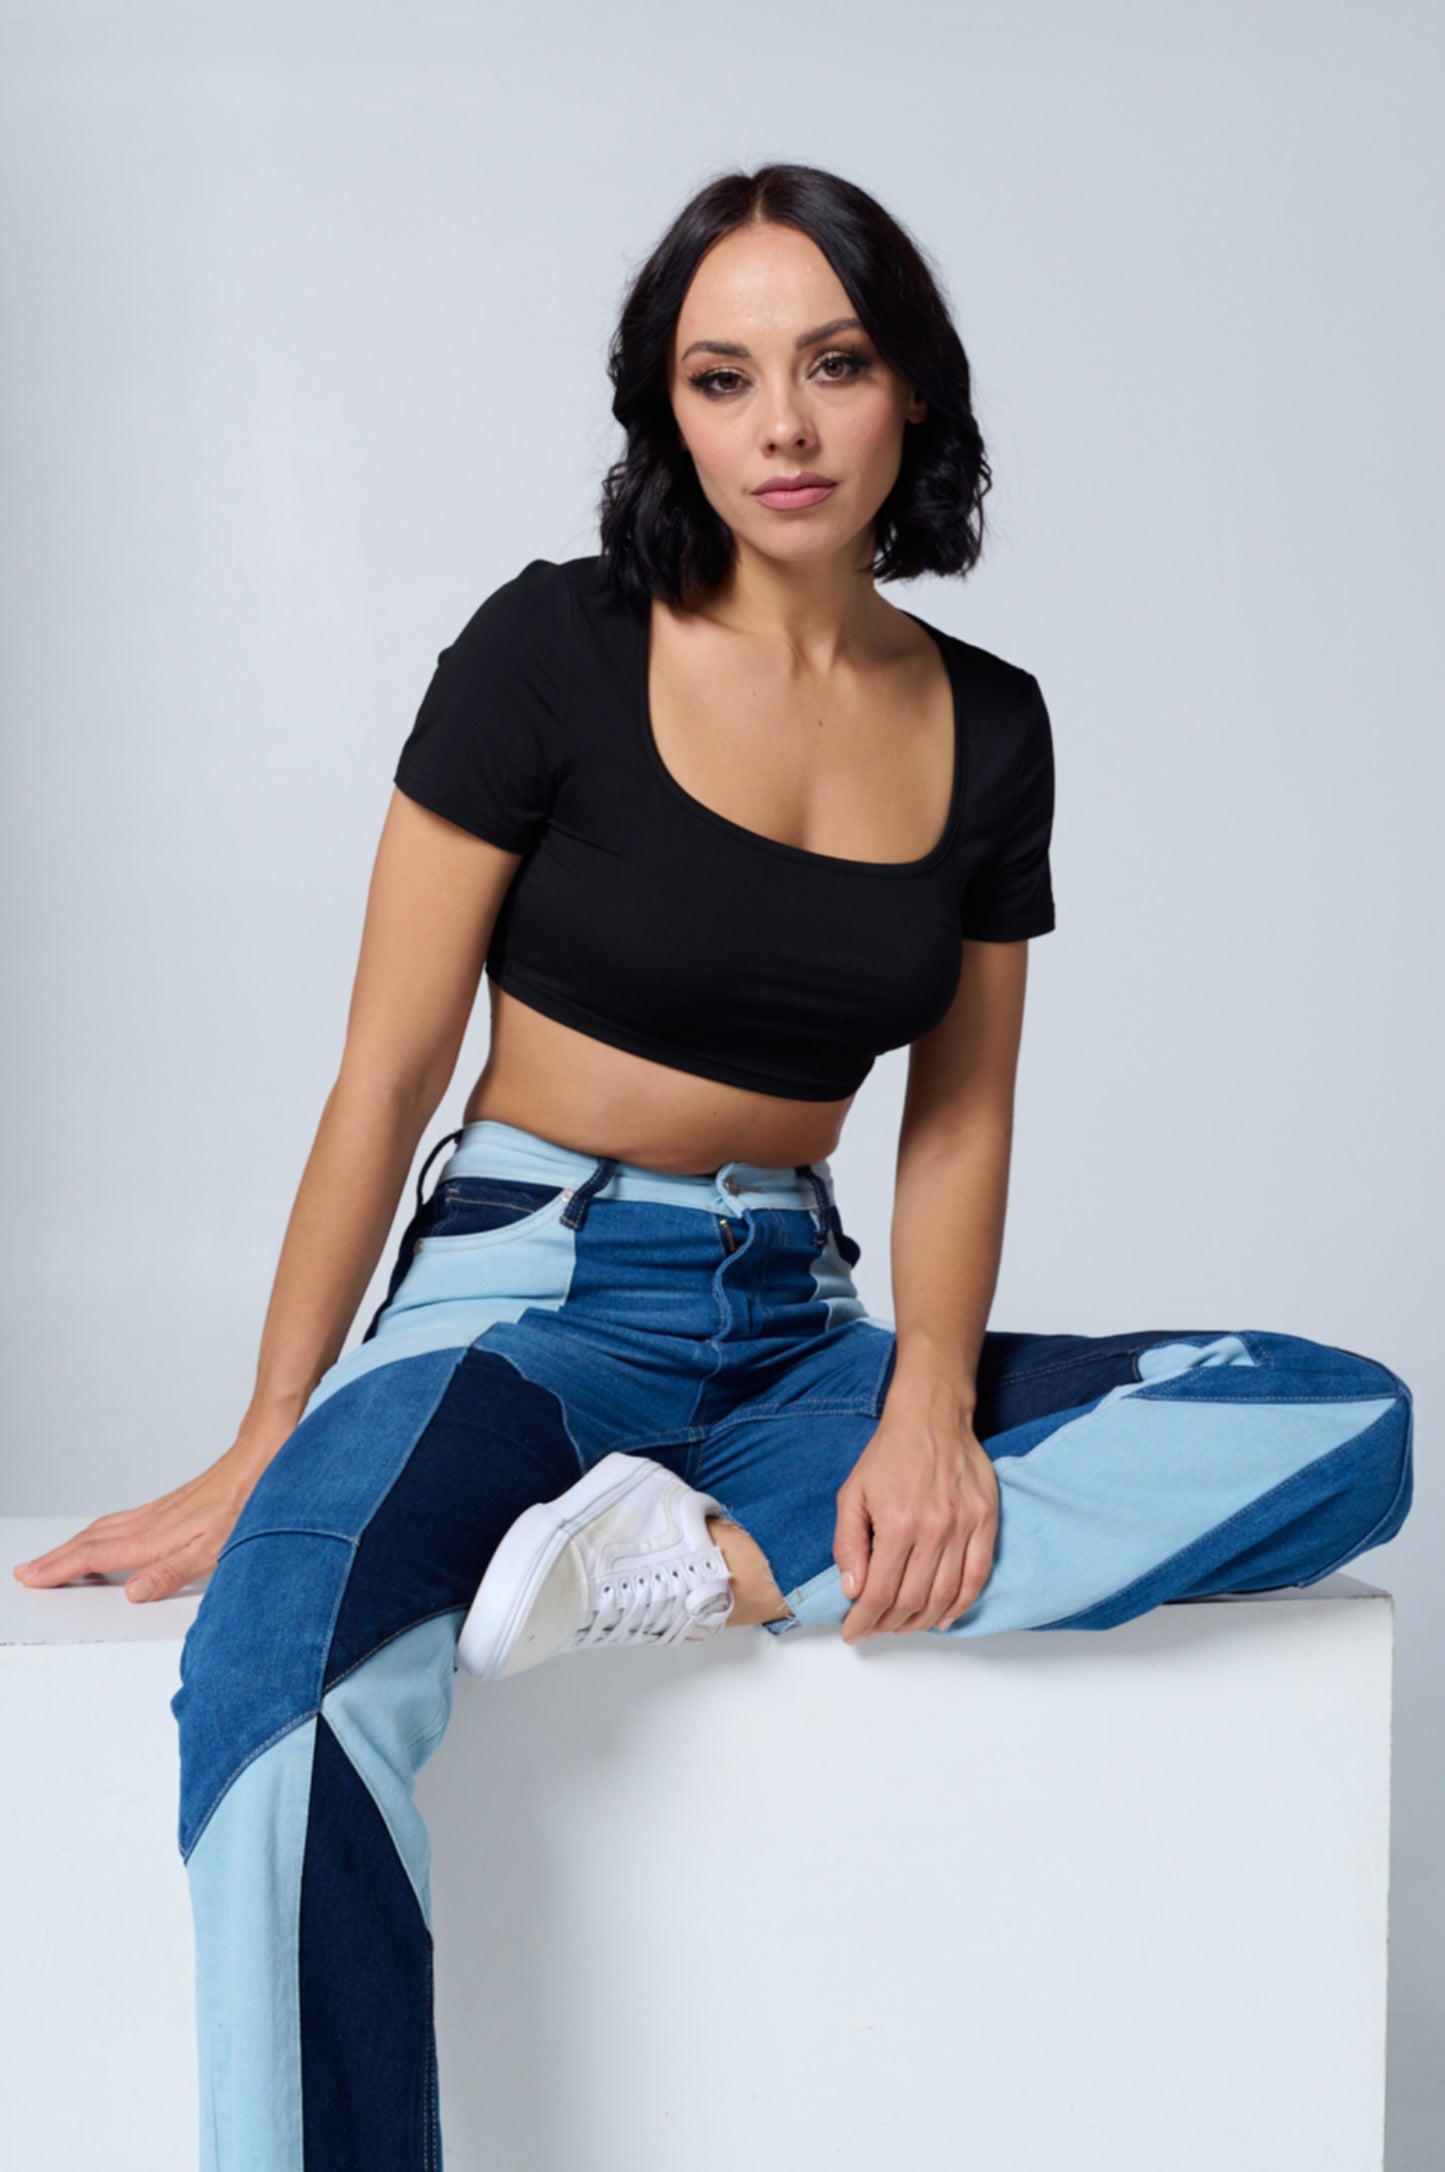 High Waist Color Block Bootcut Flare Jeans YH2205